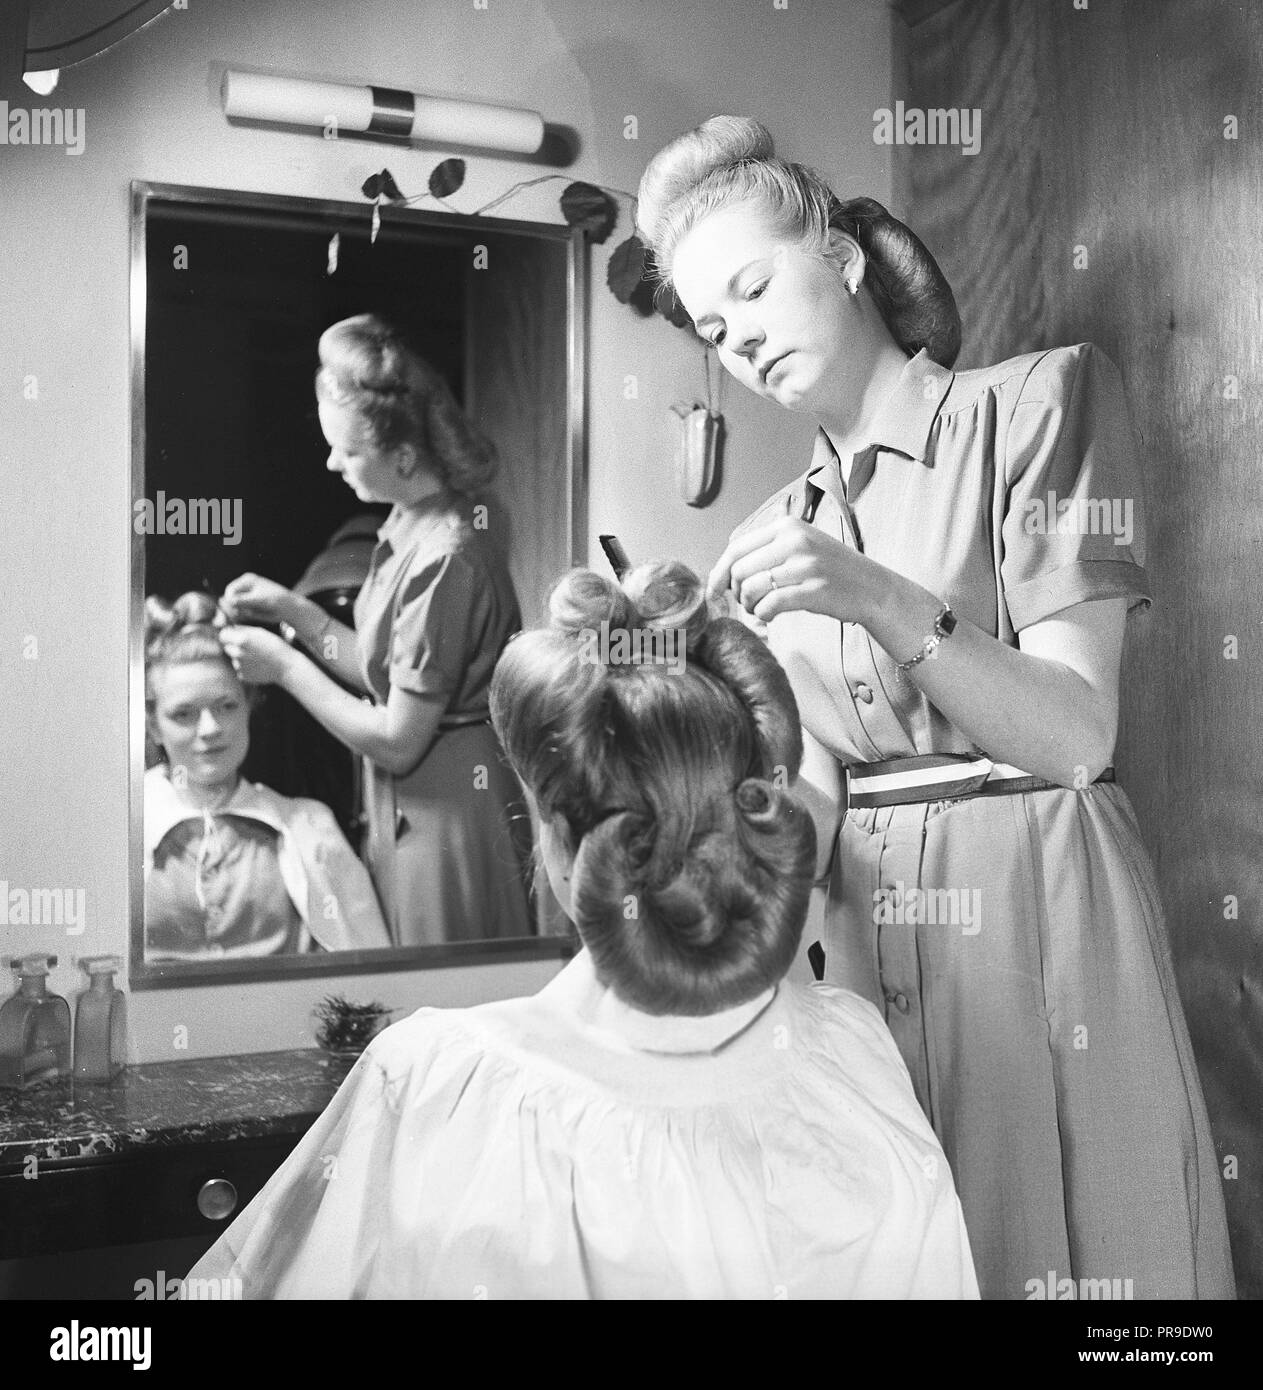 Getting a 1940s hairdo.  A dark haired young woman is looking at herself in the mirror at the ladies hairdresser's salon while a hairdresser is styling and shaping the hair into a typical 1940s hairdo. Sweden 1947. Photo Kristoffersson ref AB22-7 Stock Photo